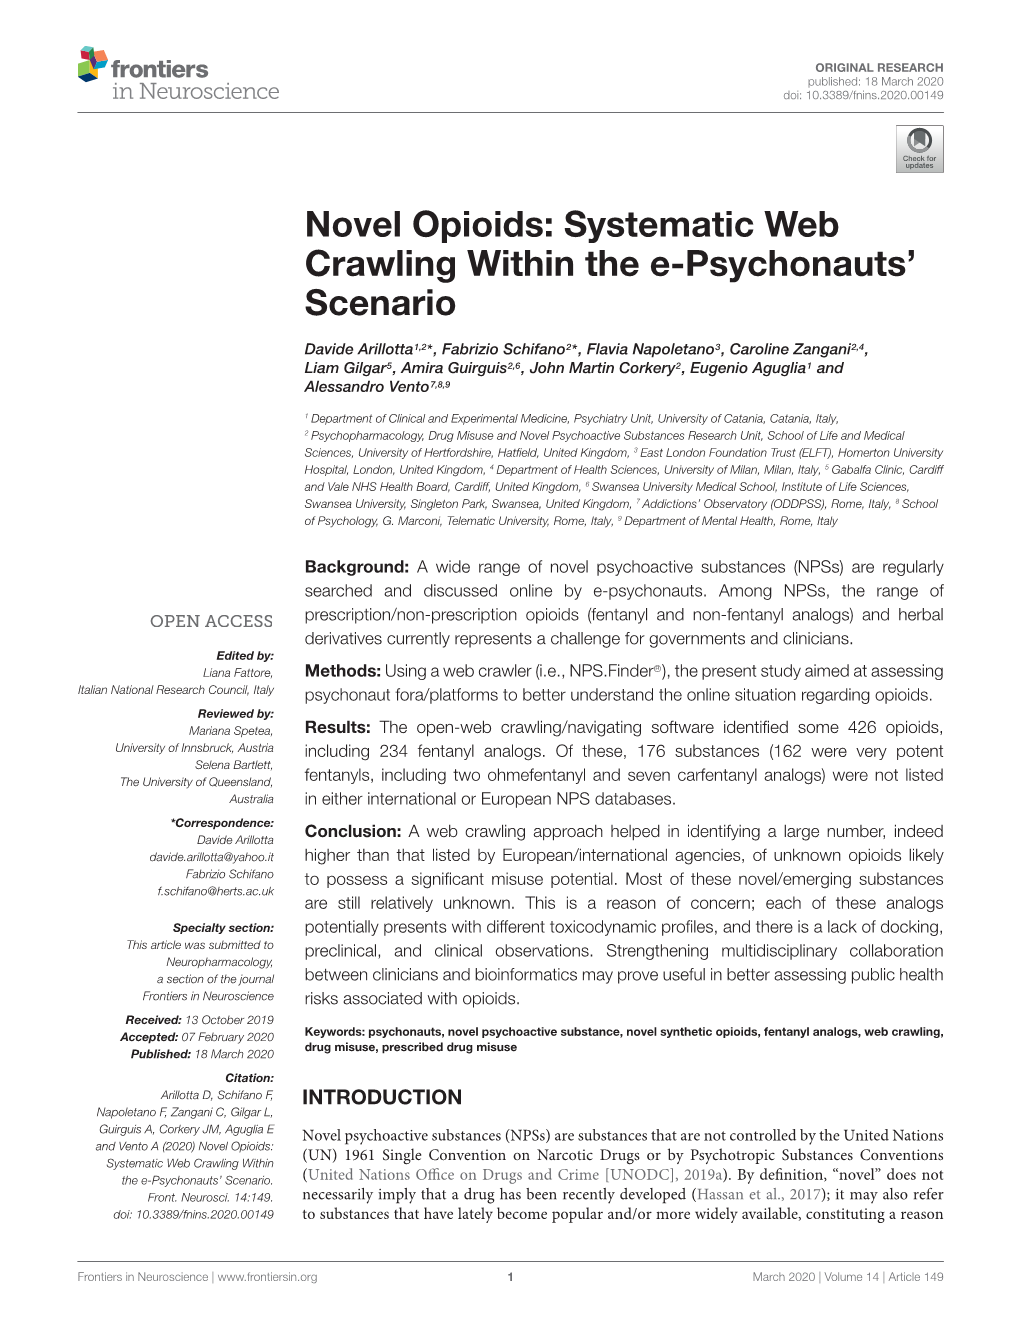 Novel Opioids: Systematic Web Crawling Within the E-Psychonauts’ Scenario